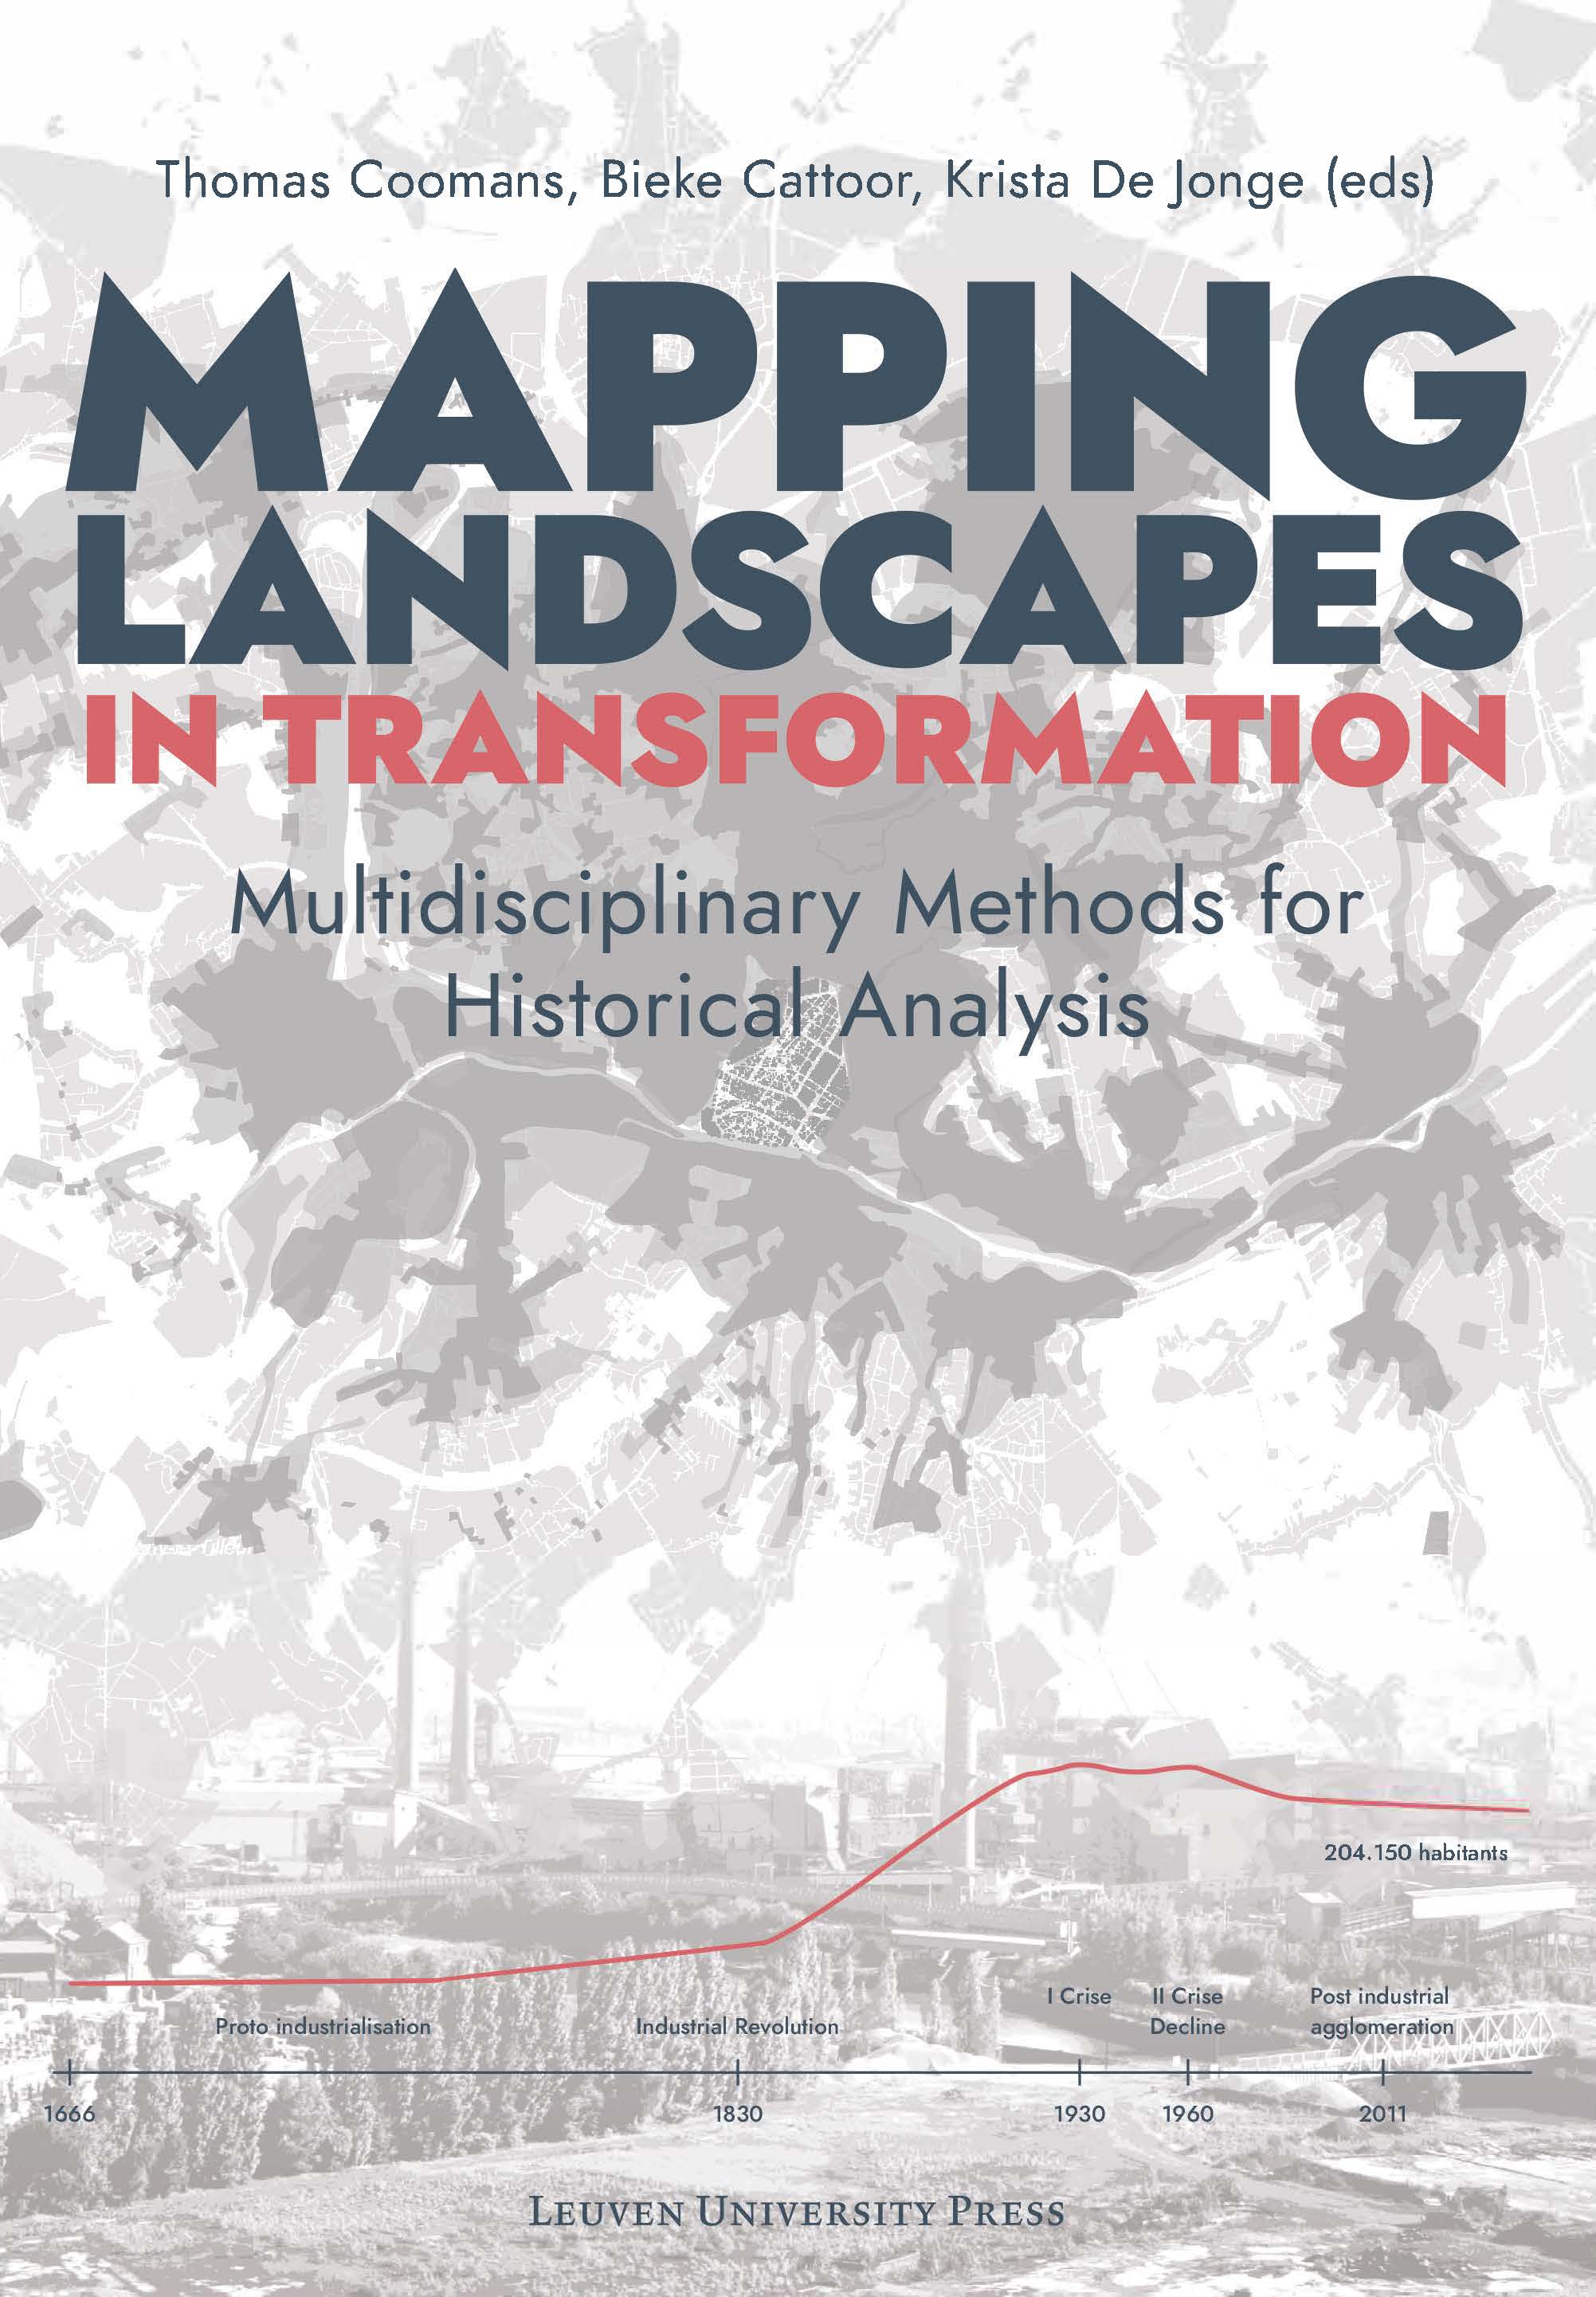 Mapping Landscapes in Transformation